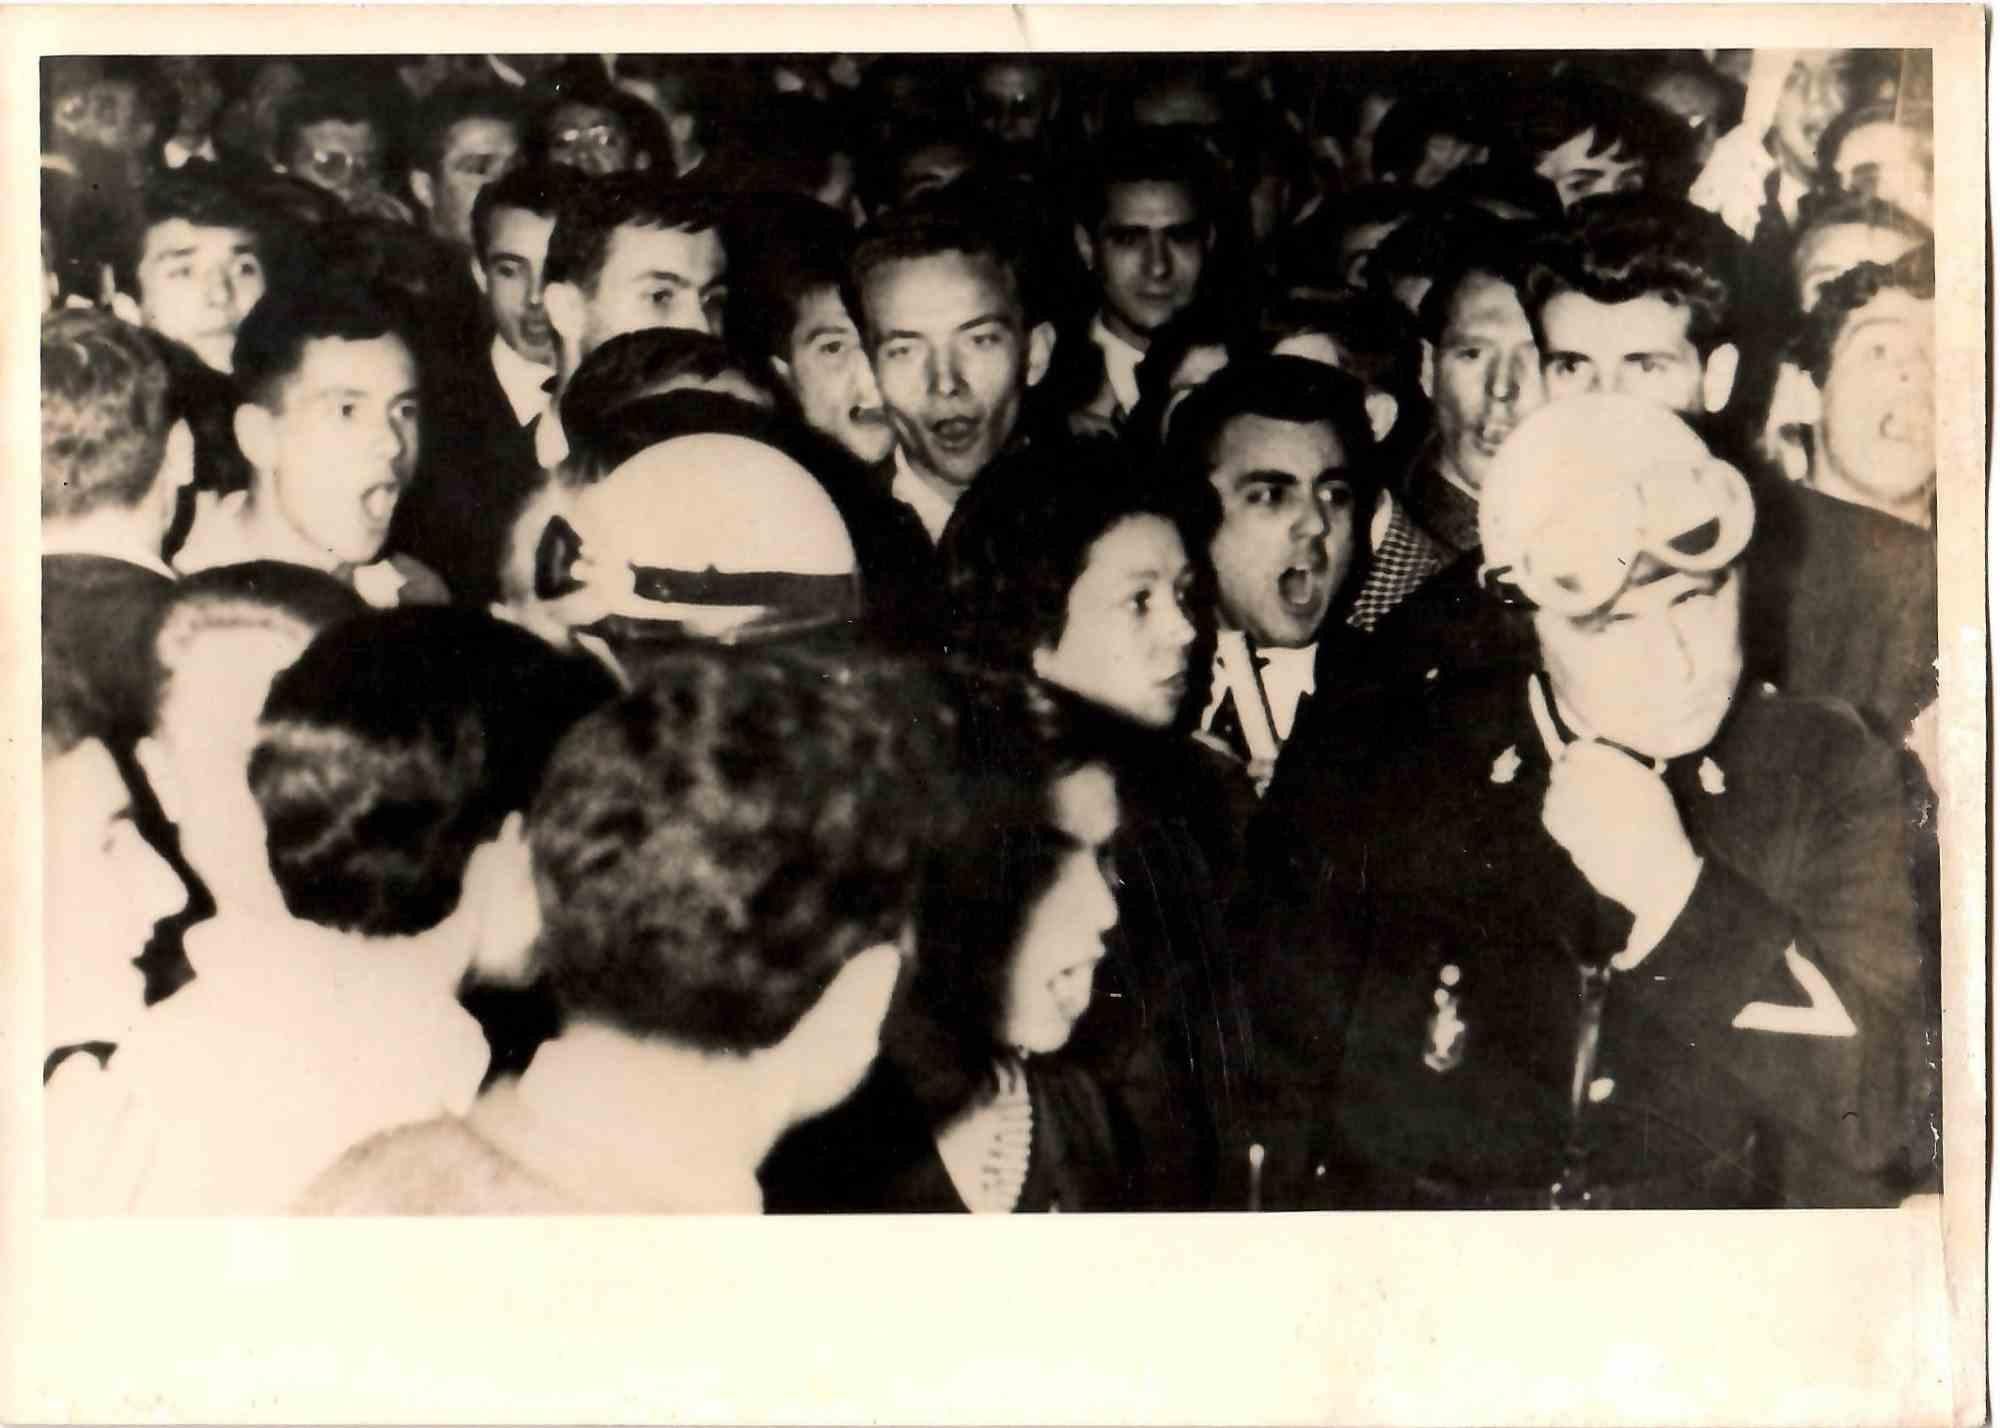 Unknown Black and White Photograph - Algeria's 1960 - Vintage Photograph - Mid-20th Century